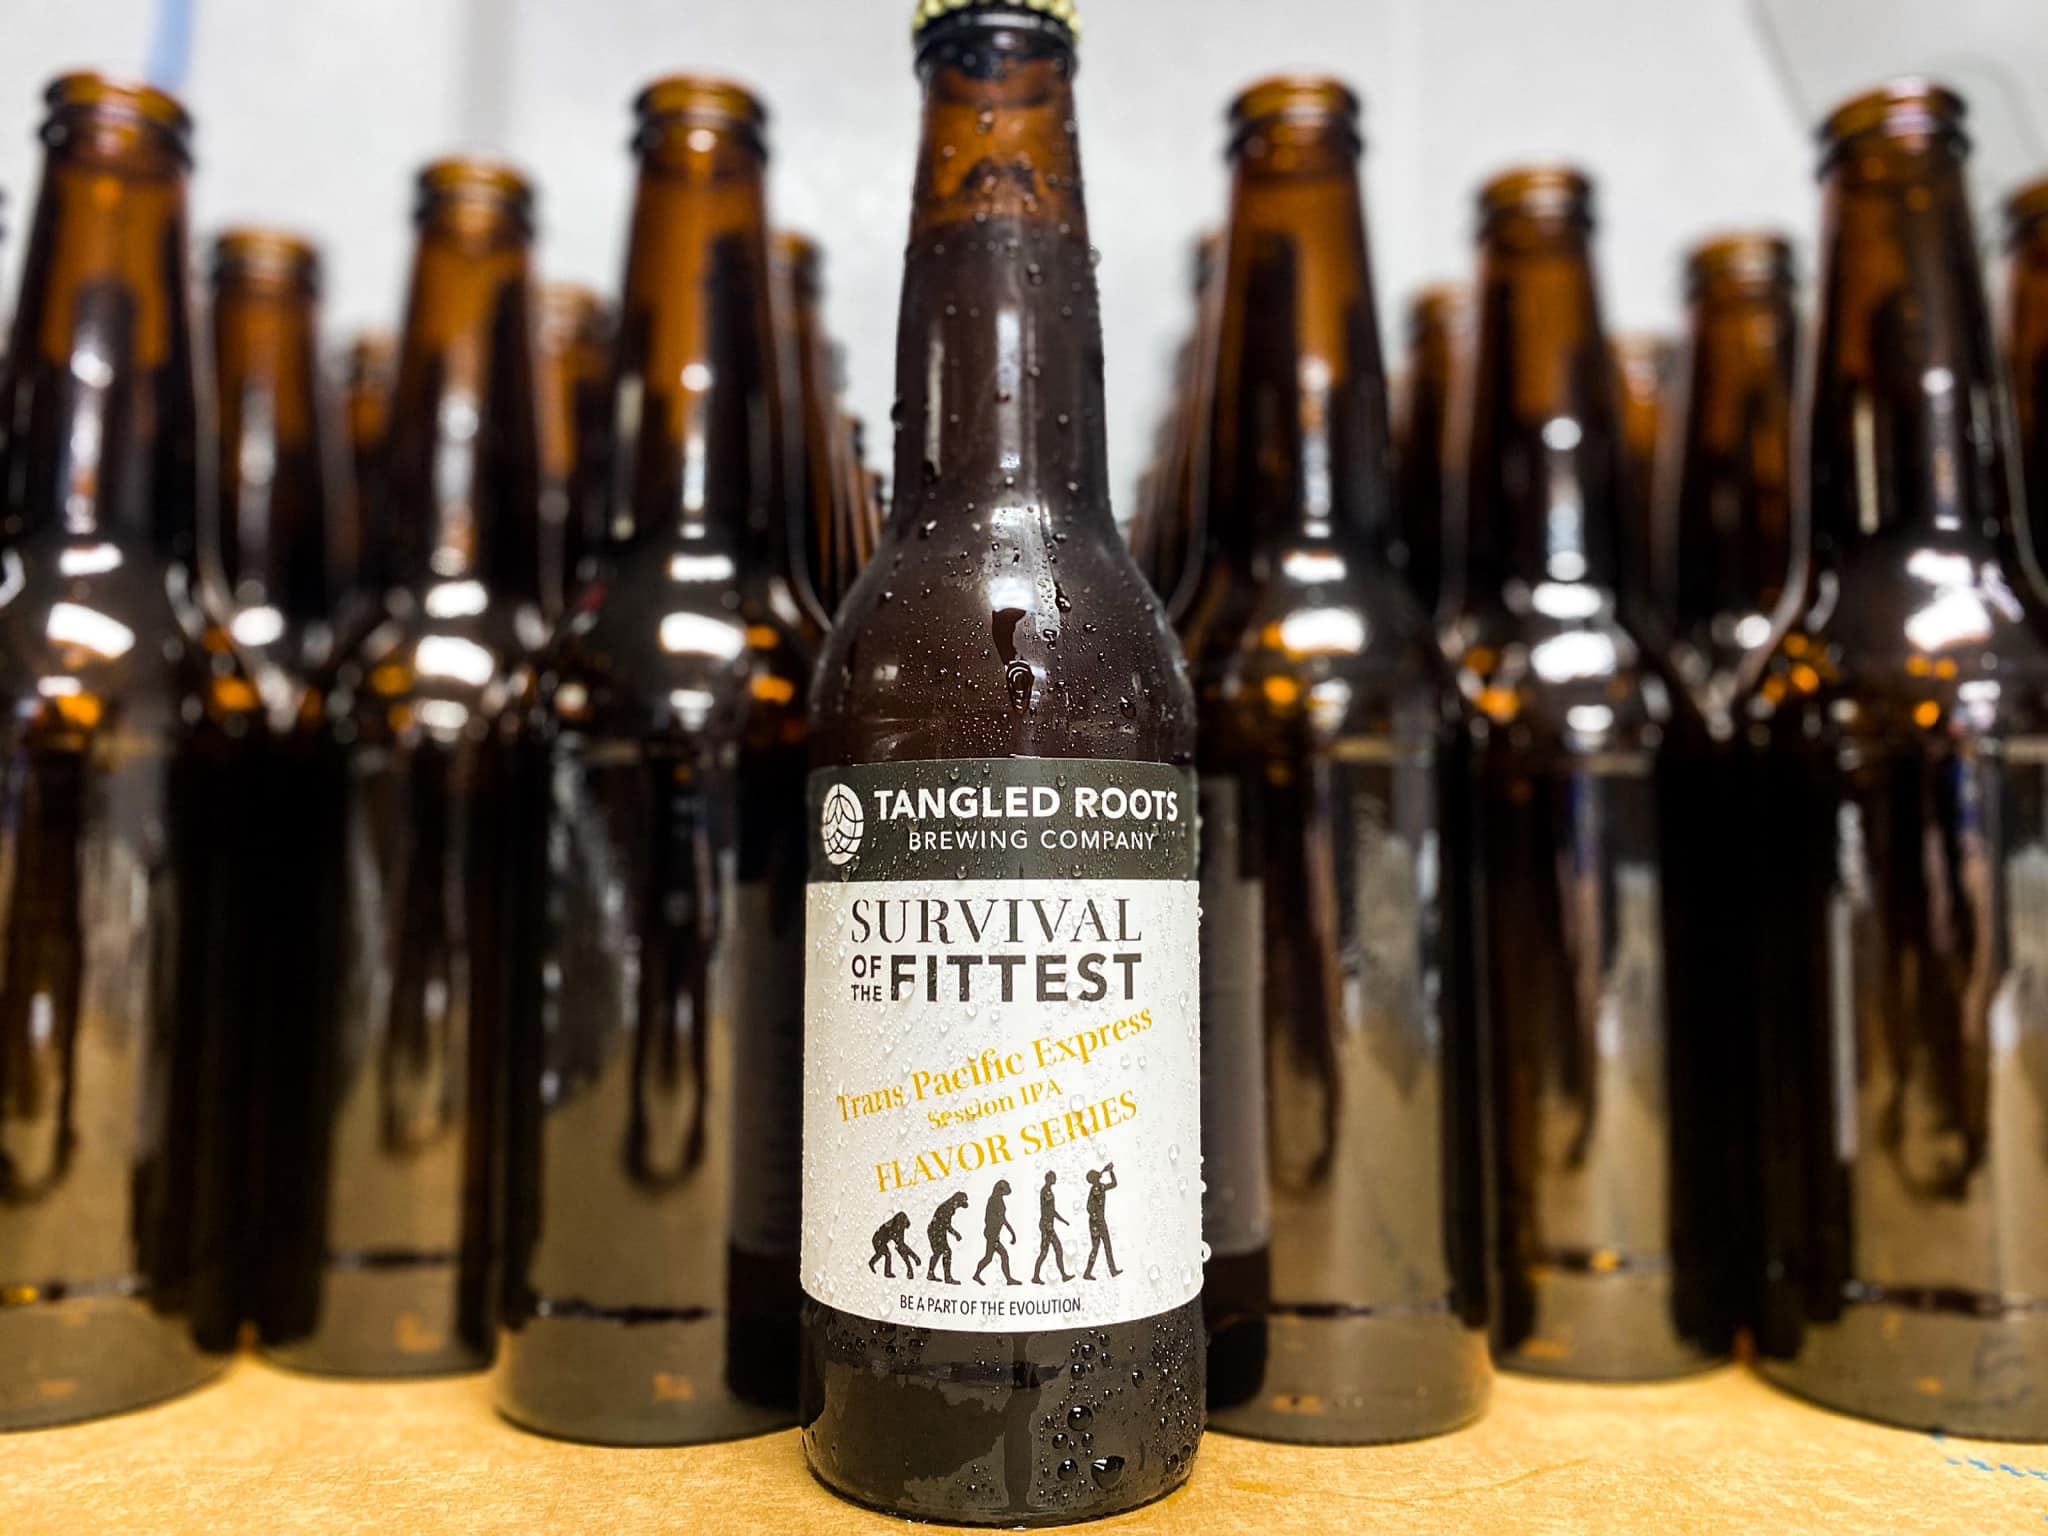 several bottles of Tangled Roots beer